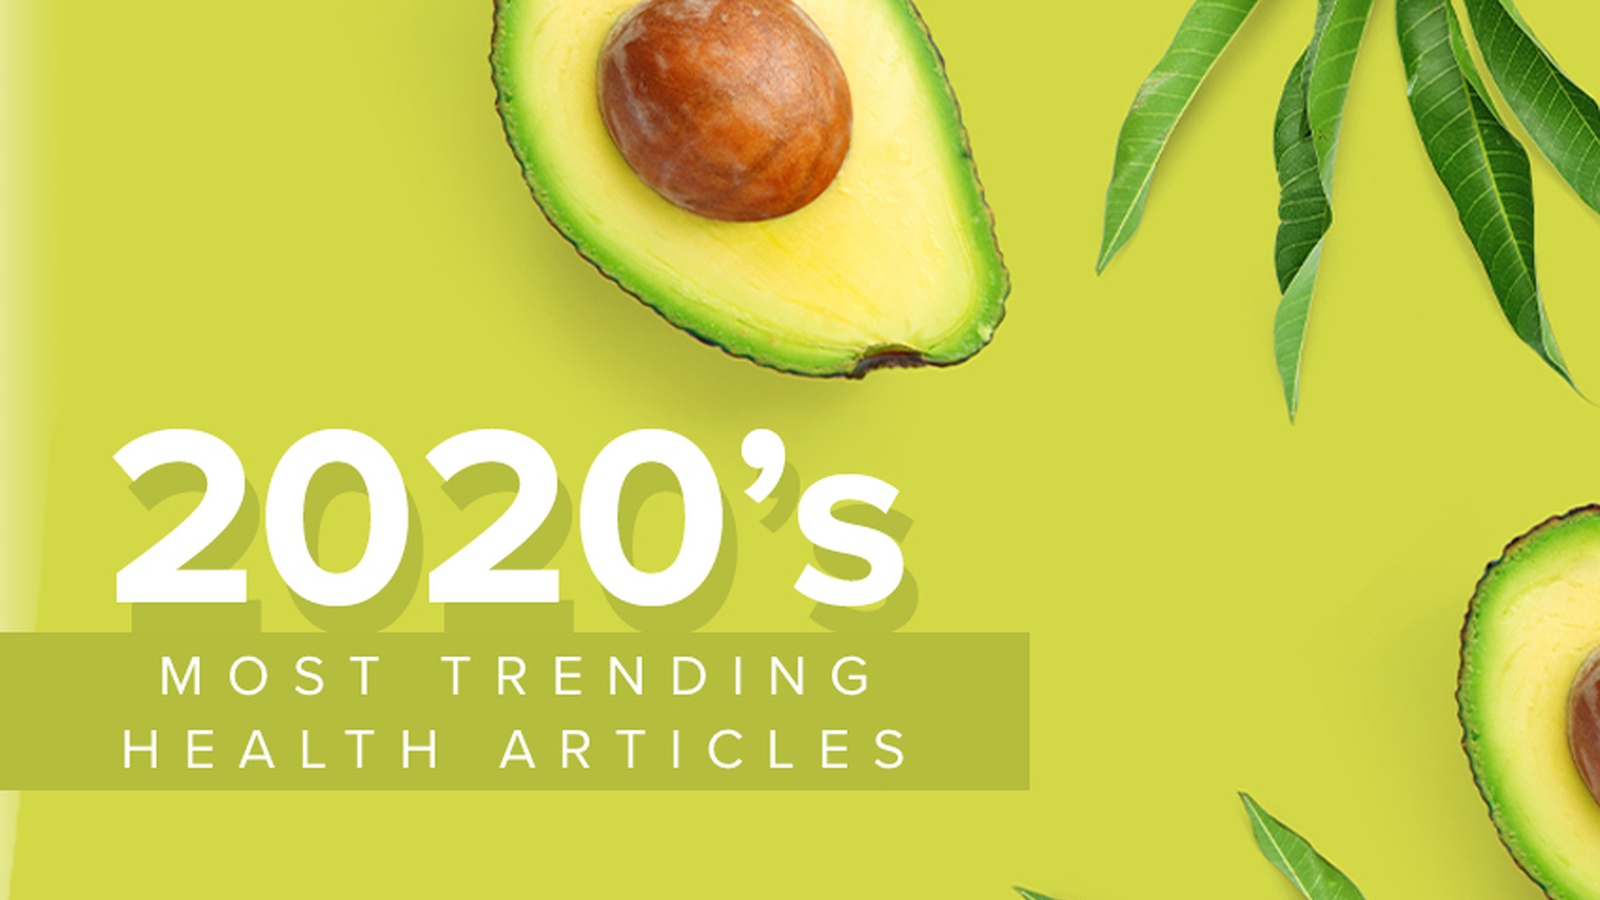 2020’s Most Trending Health Articles